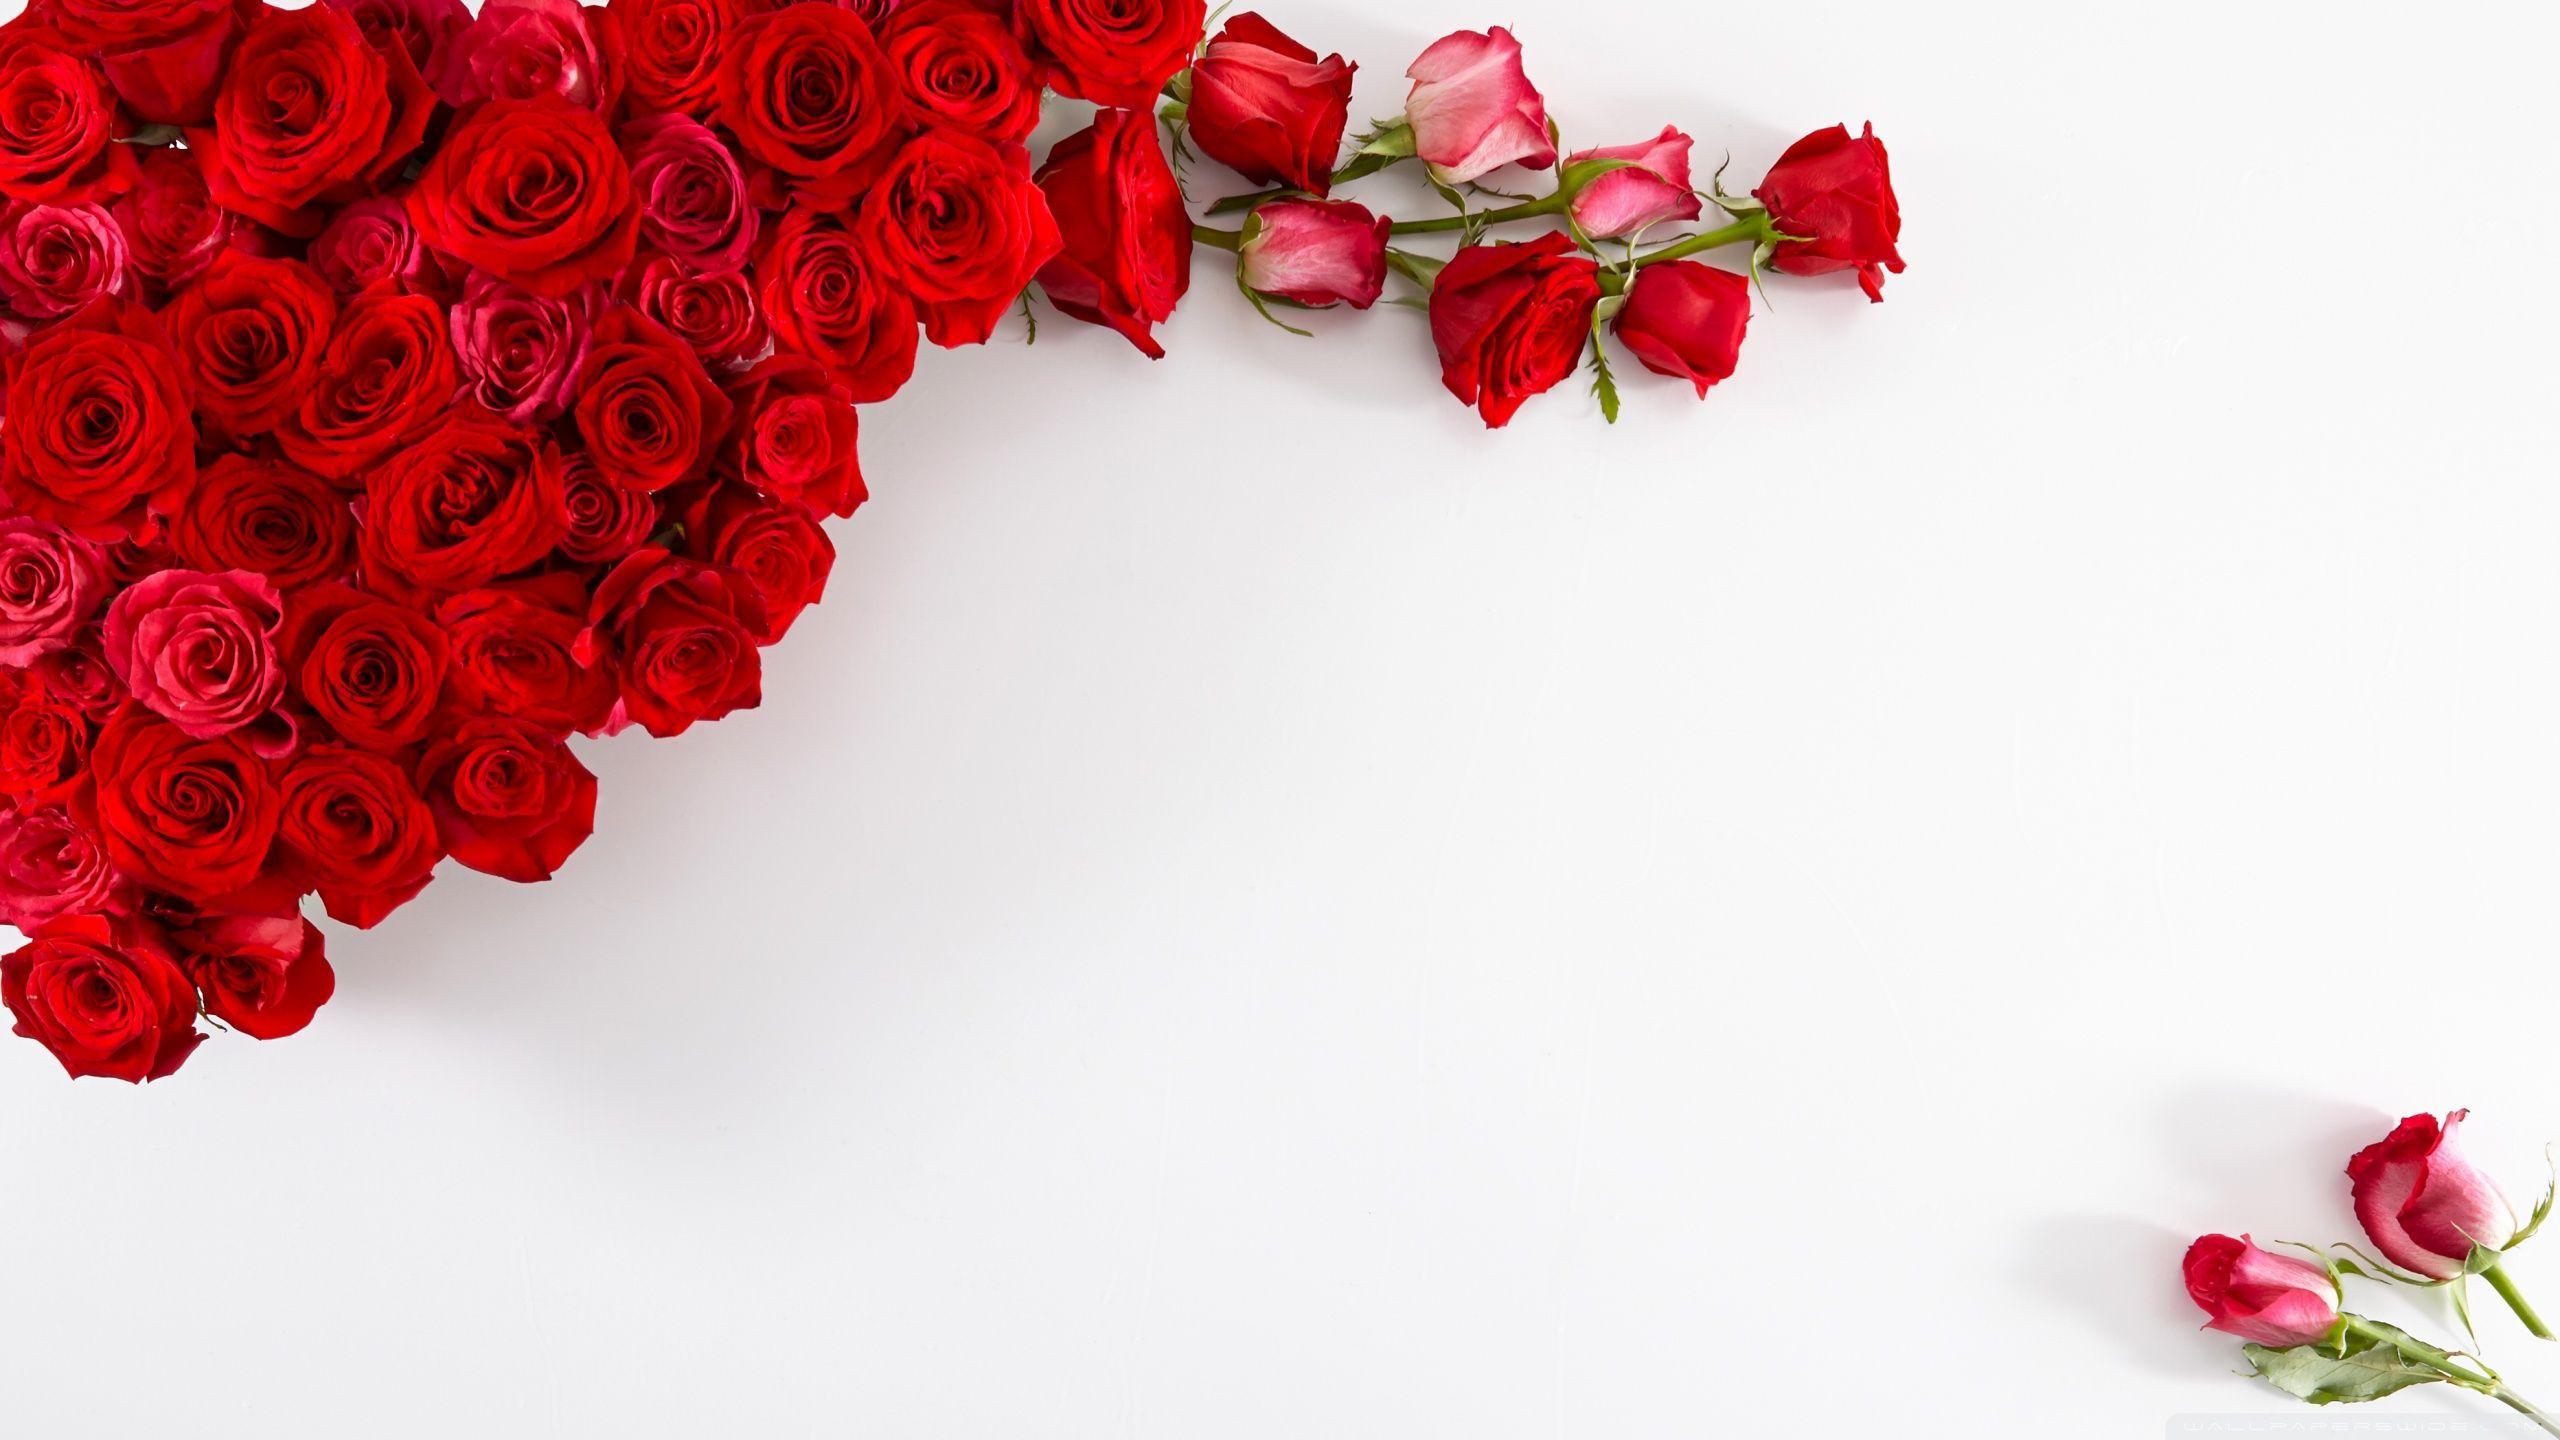 Red Roses on White Background HD desktop wallpaper, Widescreen